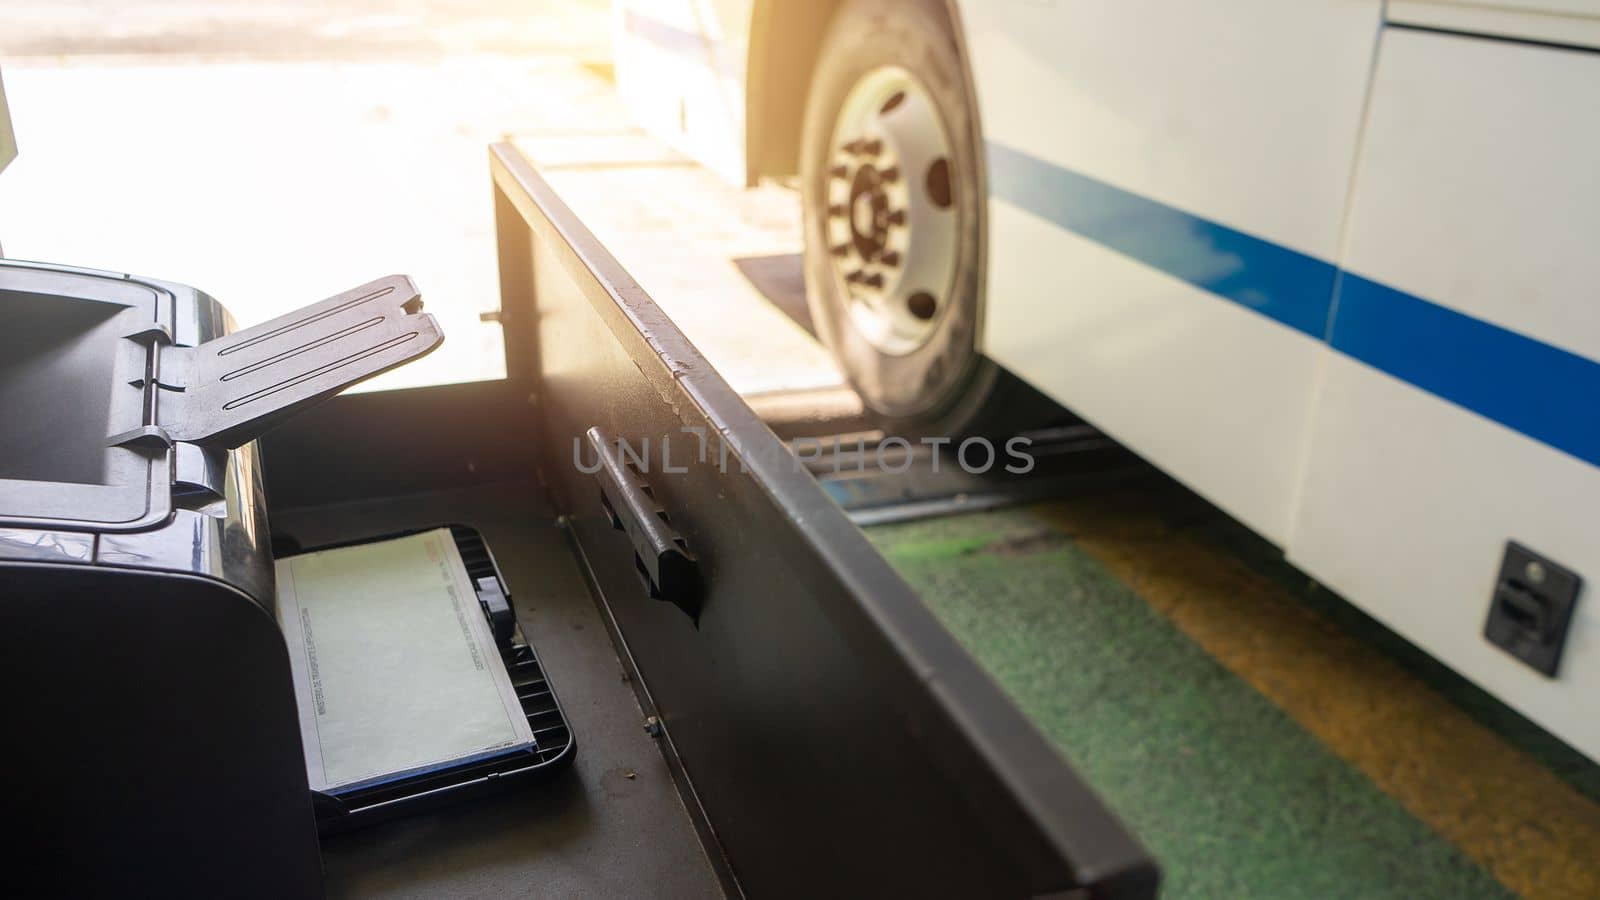 Certificate of mechanical inspection of a bus by cfalvarez